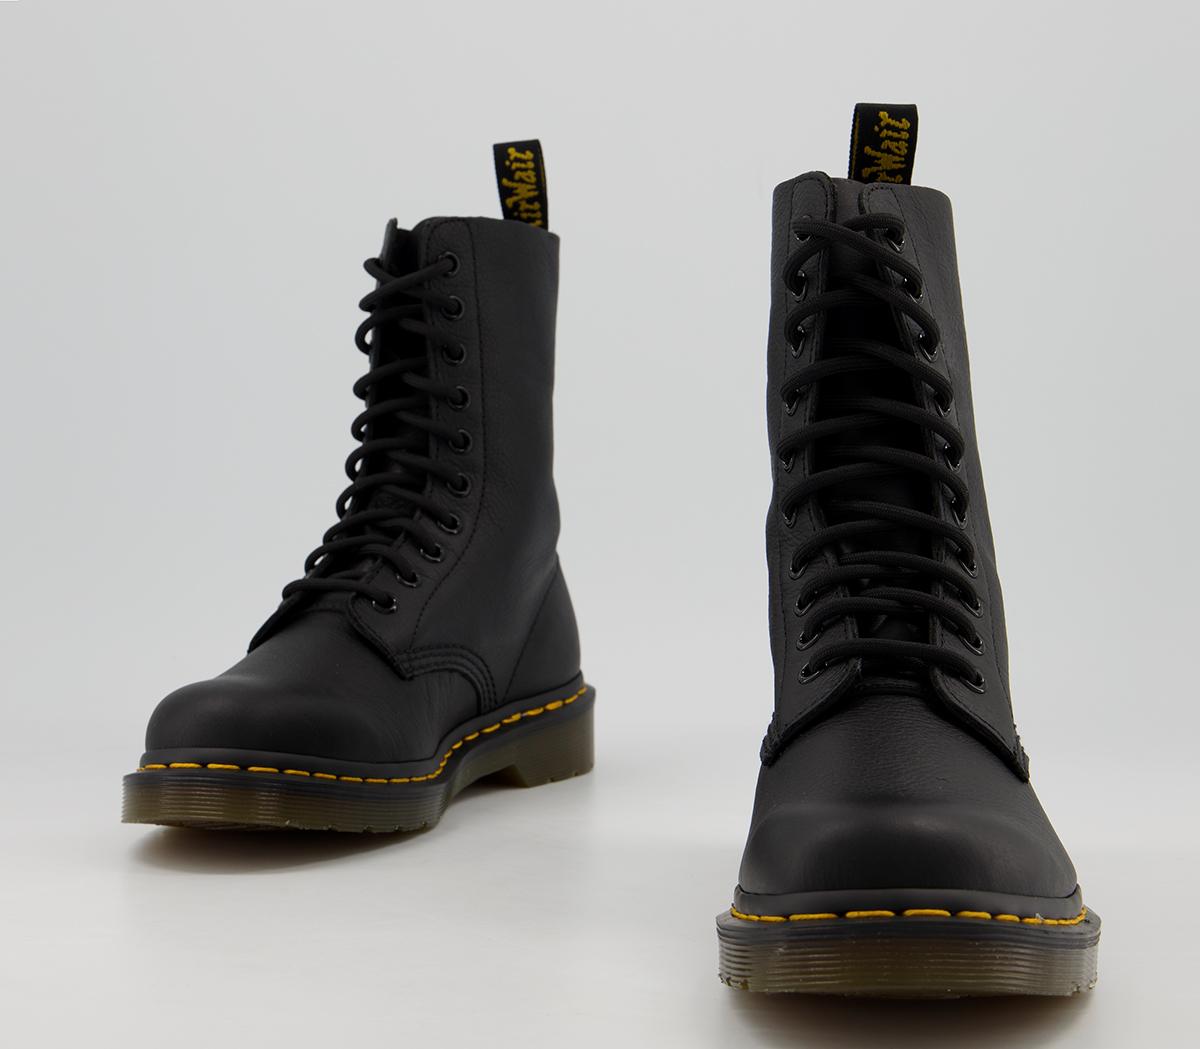 Dr. Martens 1490 10 Eye Boots Black Virginia - Women's Ankle Boots